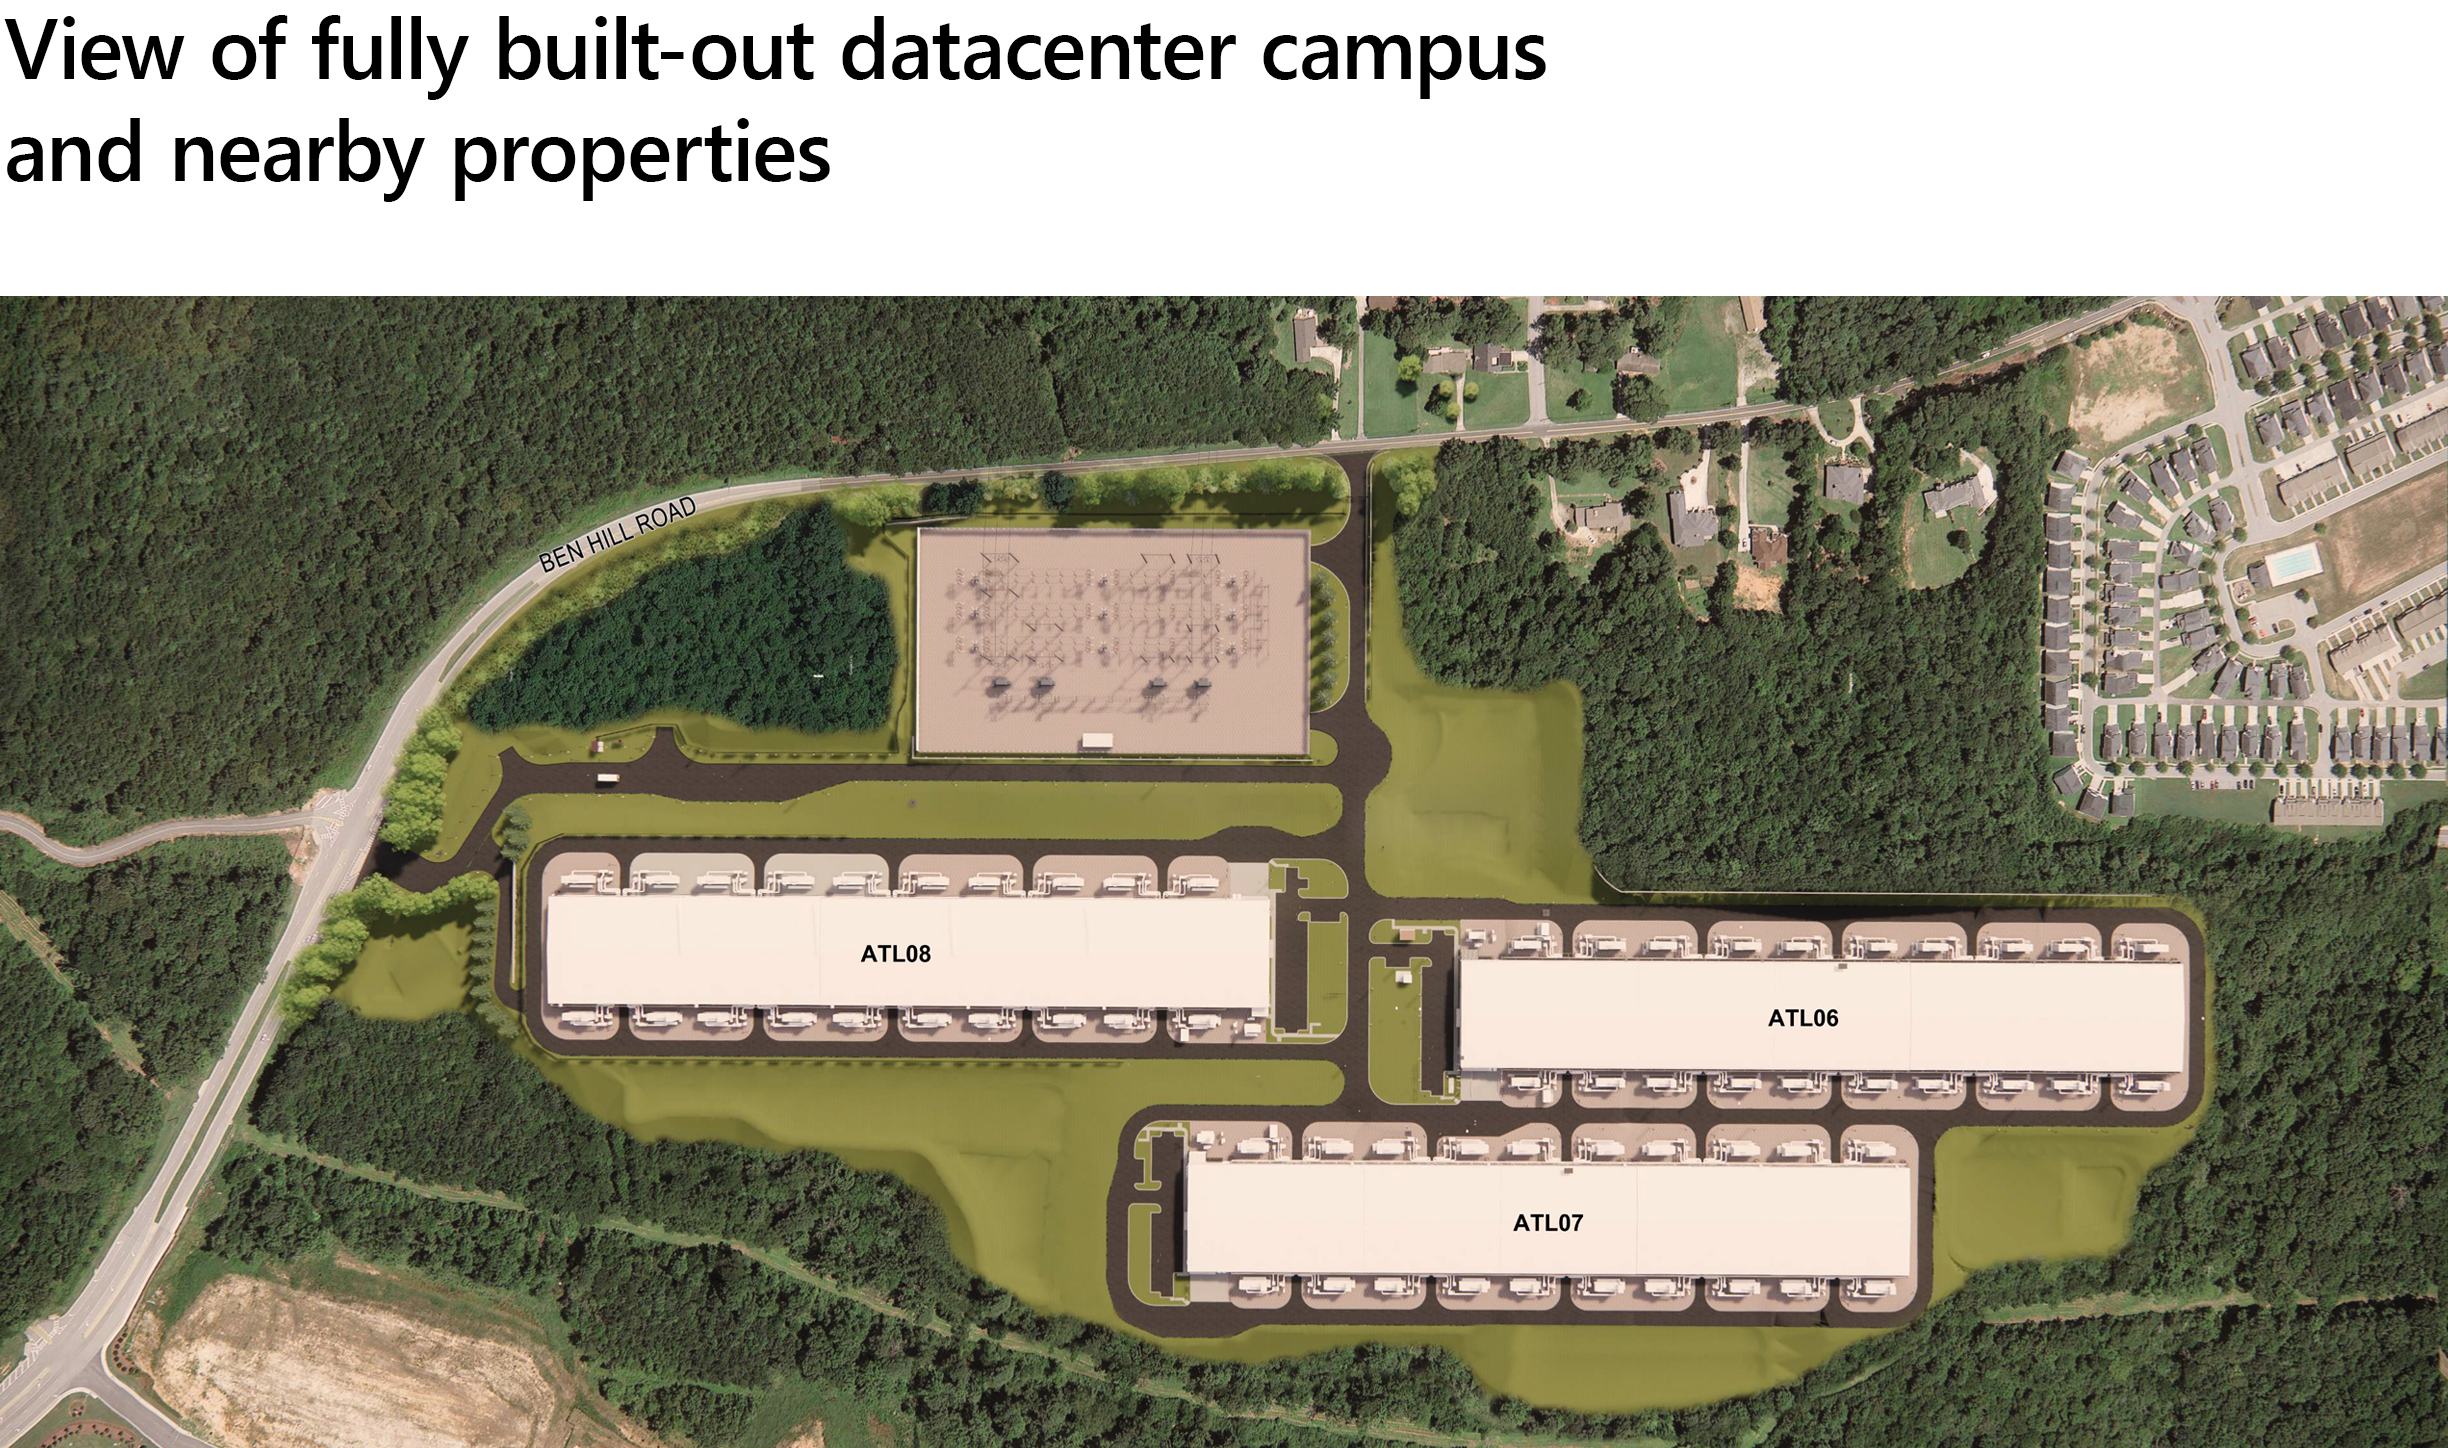 View of fully built-out datacenter campus and nearby properties